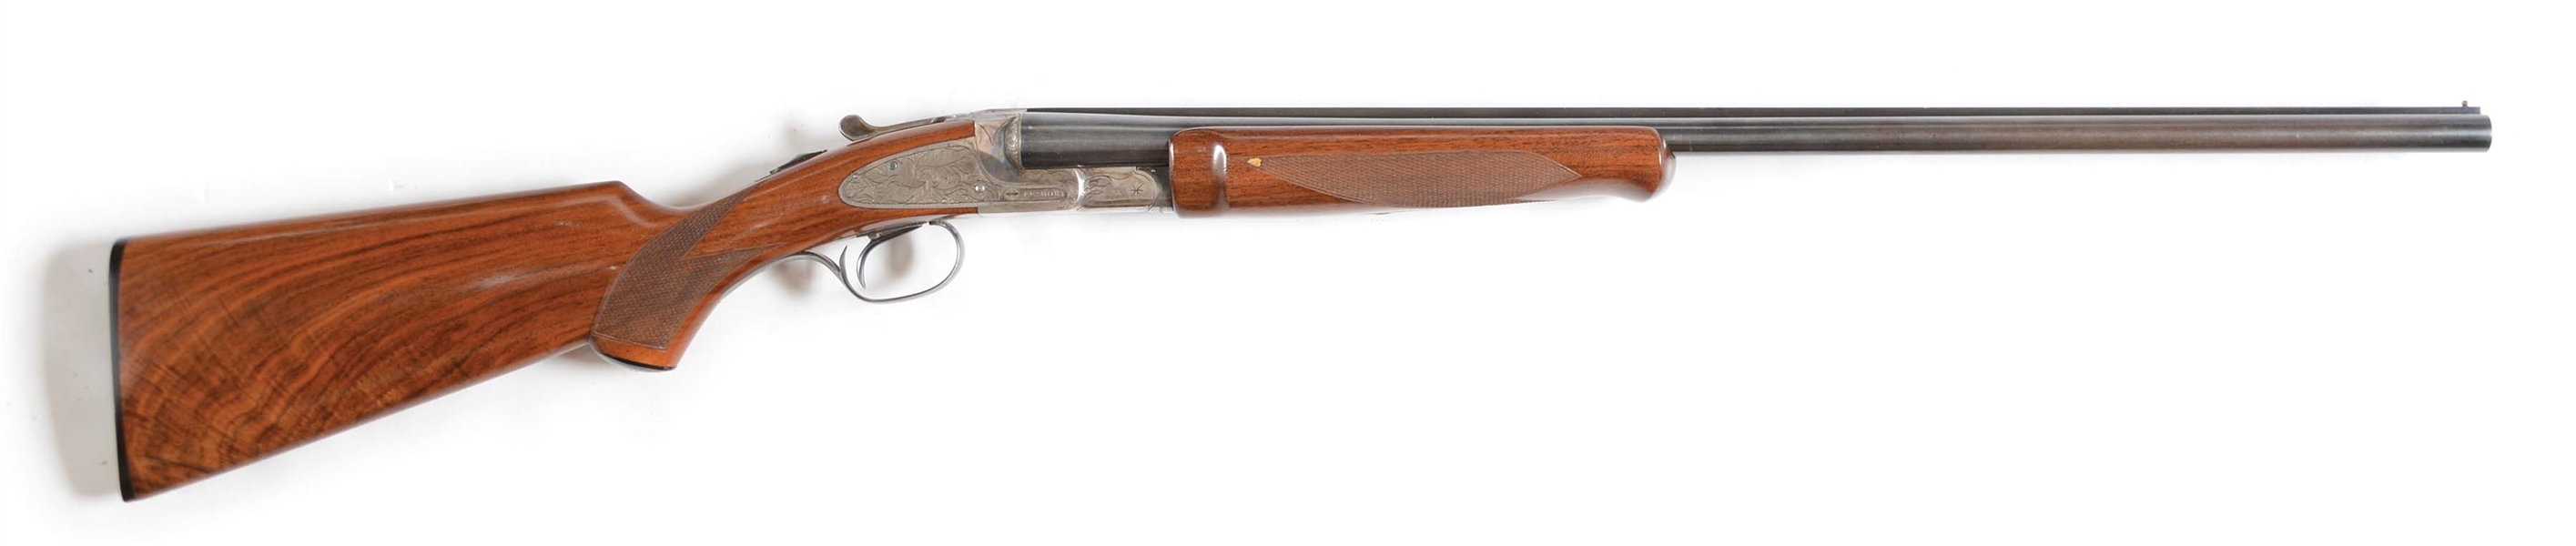 (C) SCARCE AND LATE L. C. SMITH IDEAL SIDE BY SIDE SHOTGUN IN 20 BORE.